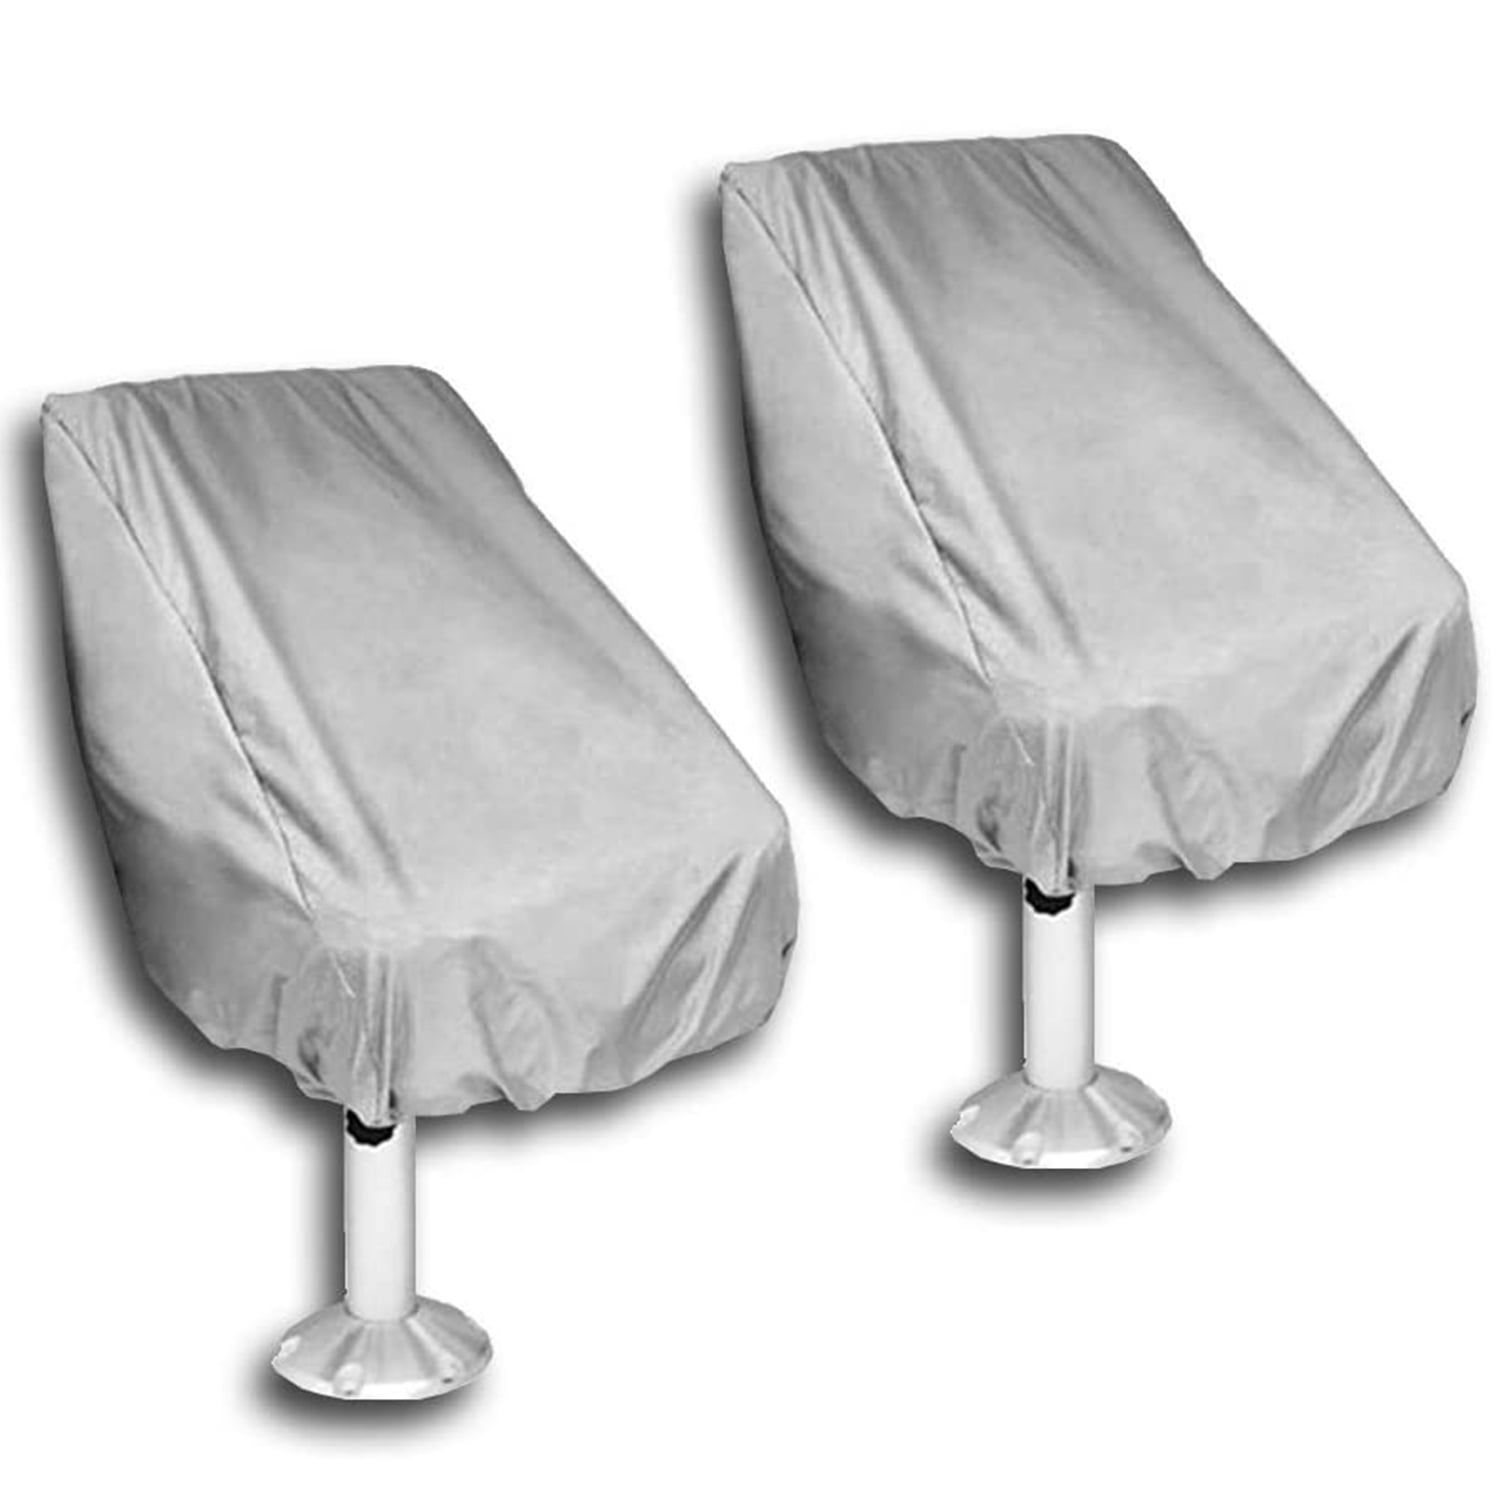 Ridecle Boat Seat Cover,Pontoon Chair Cover Classic Accessories Boat Folding Seat Cover 210D Silver Oxford Sun-Proof Rainproof Dust Cover 2017.9914.02in 